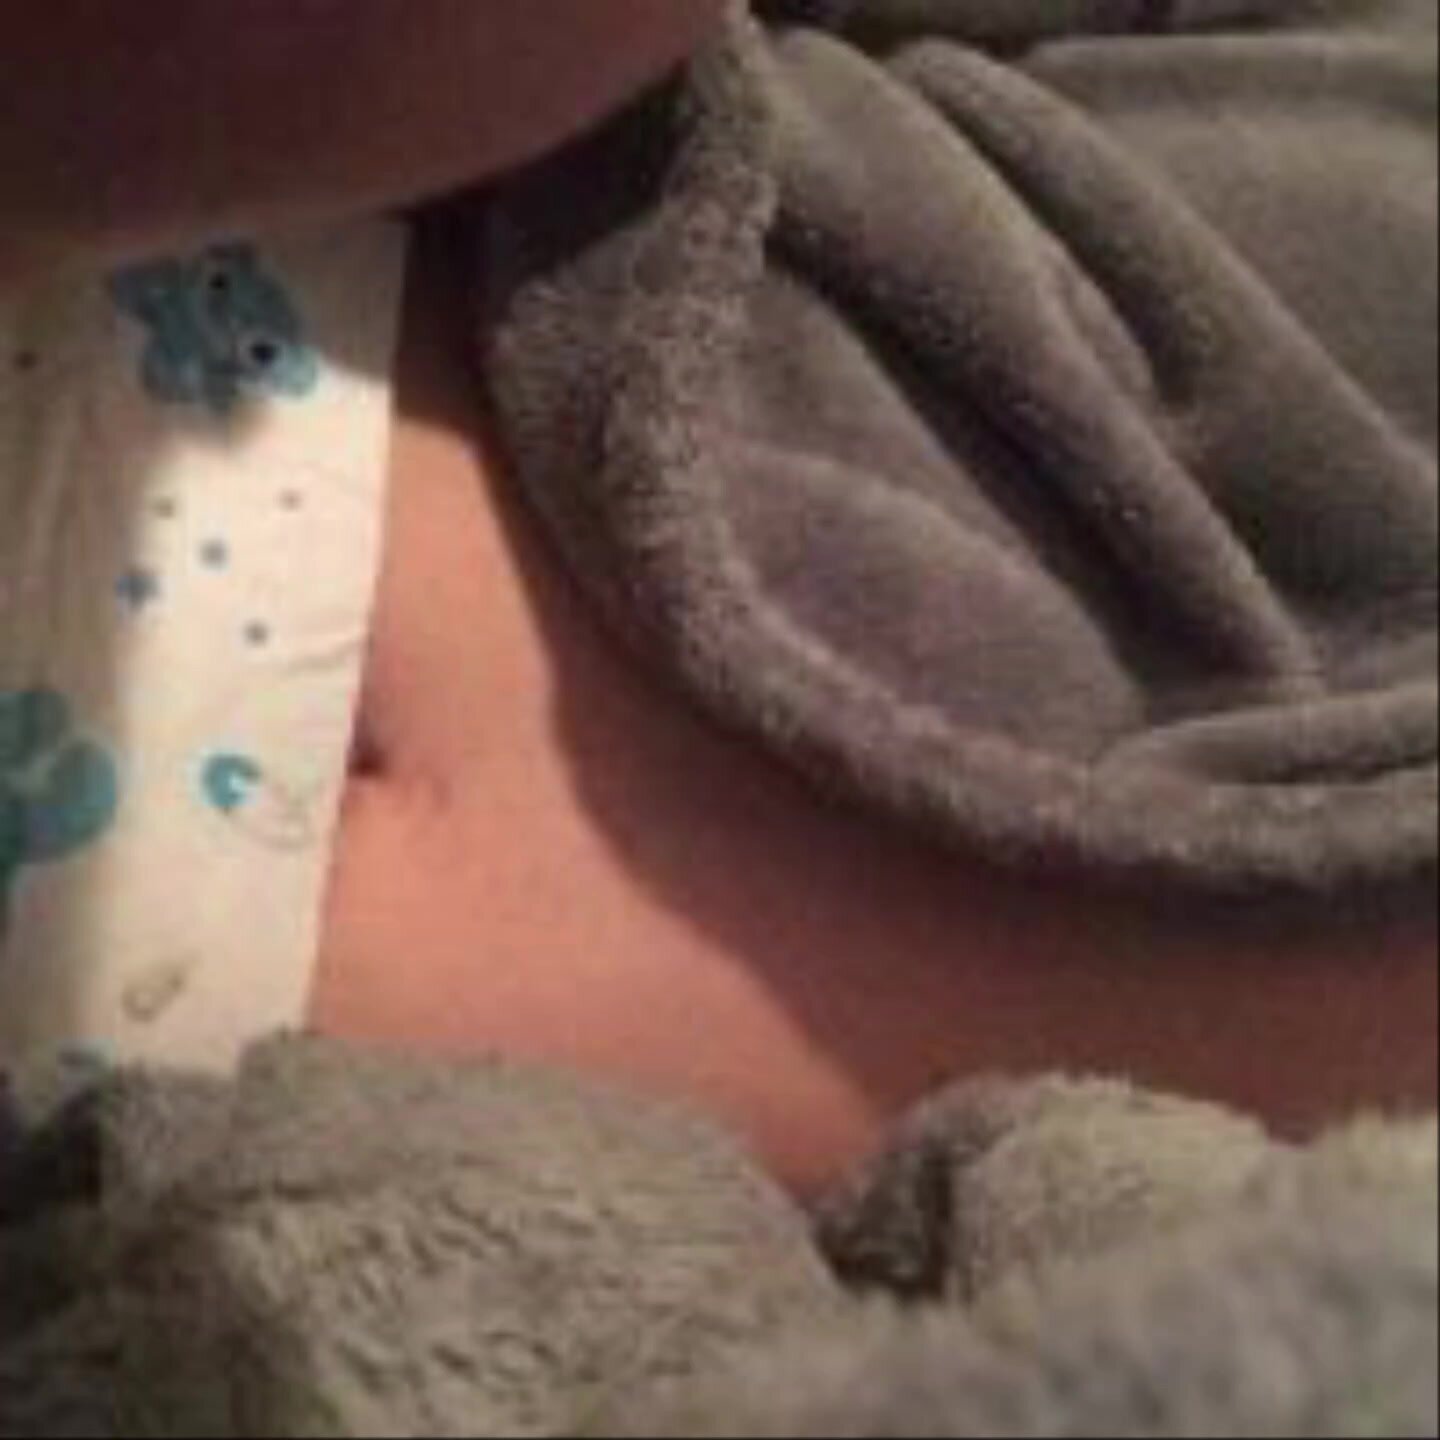 Me and my diaper - video 3